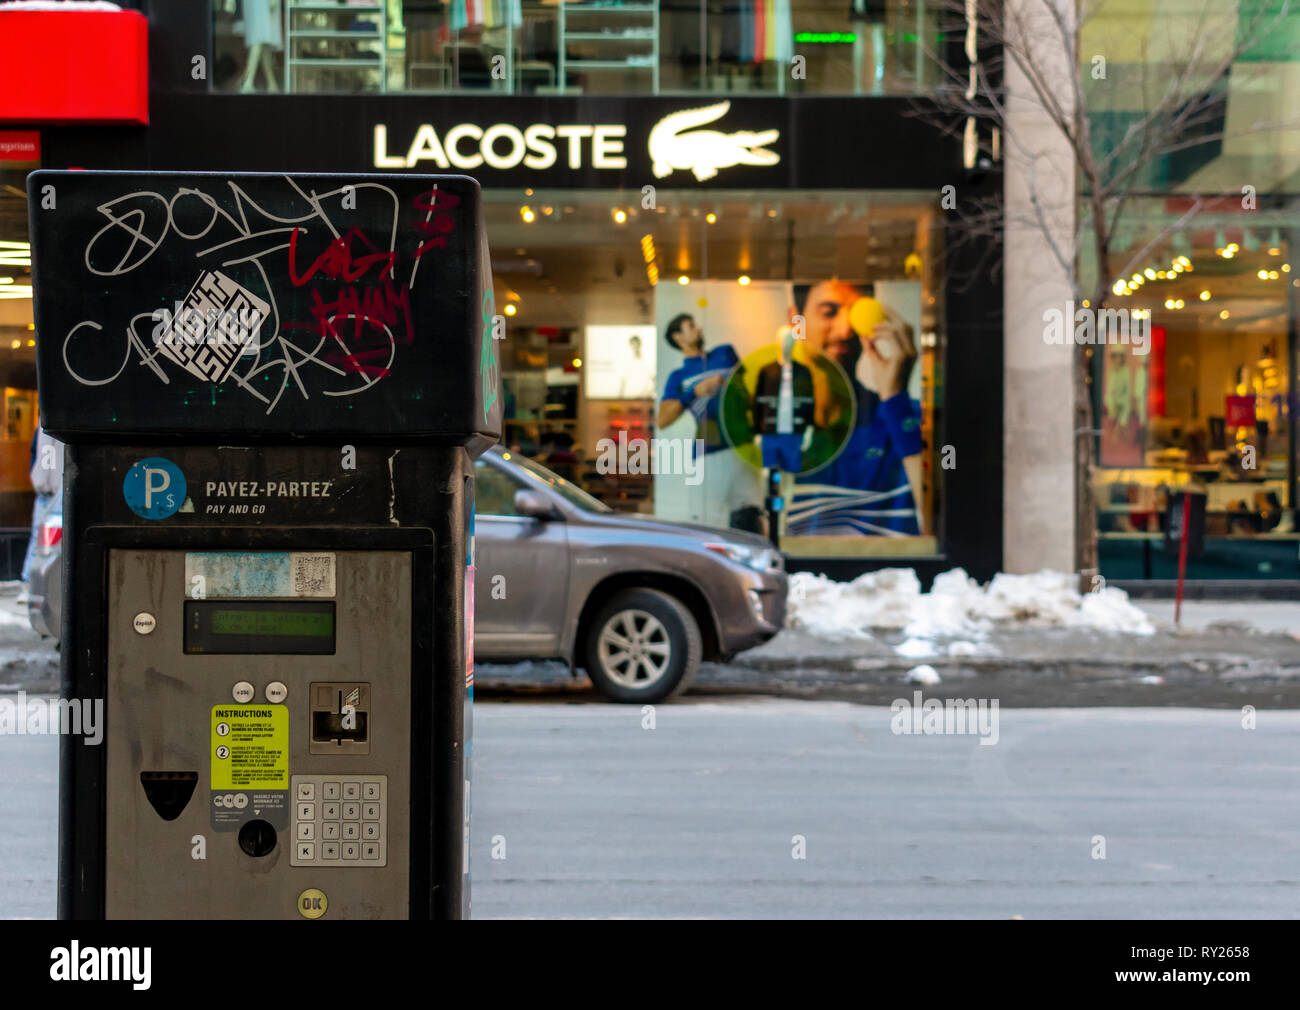 Montreal, Quebec, Canada-March 9 2019: Parking payment station in montreal downtown with lacoste logo in background Stock Photo